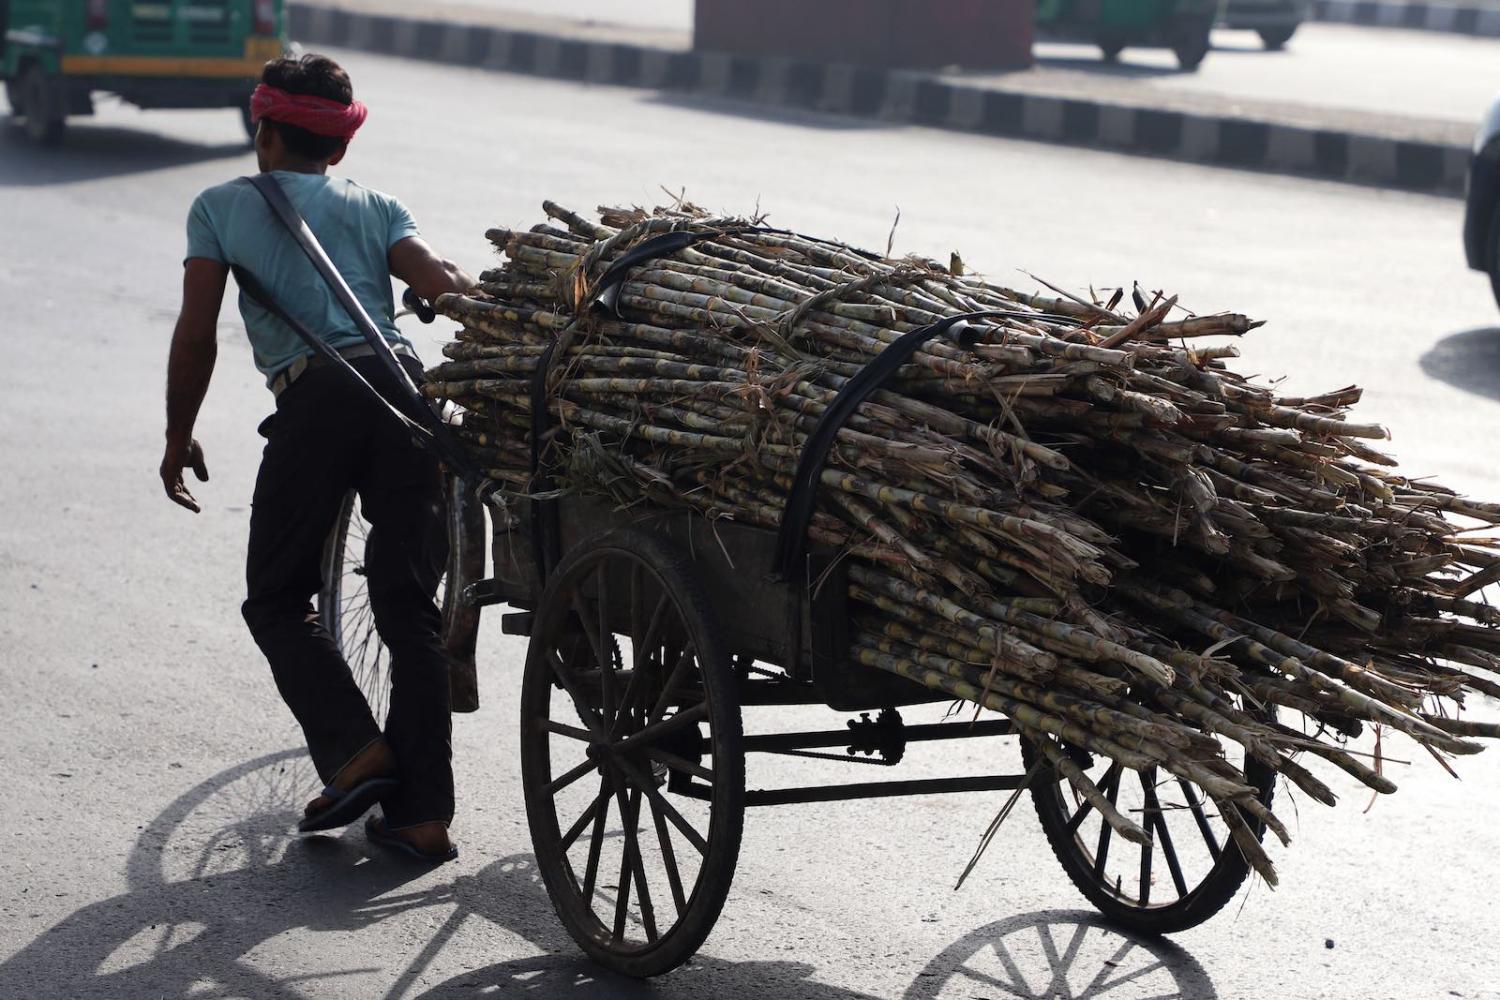 After the harvest, sugarcane in New Delhi in March (Photo: filled with sugarcane in New Delhi, India, on 29 March 2019. (Photo by Nasir Kachroo via Getty)